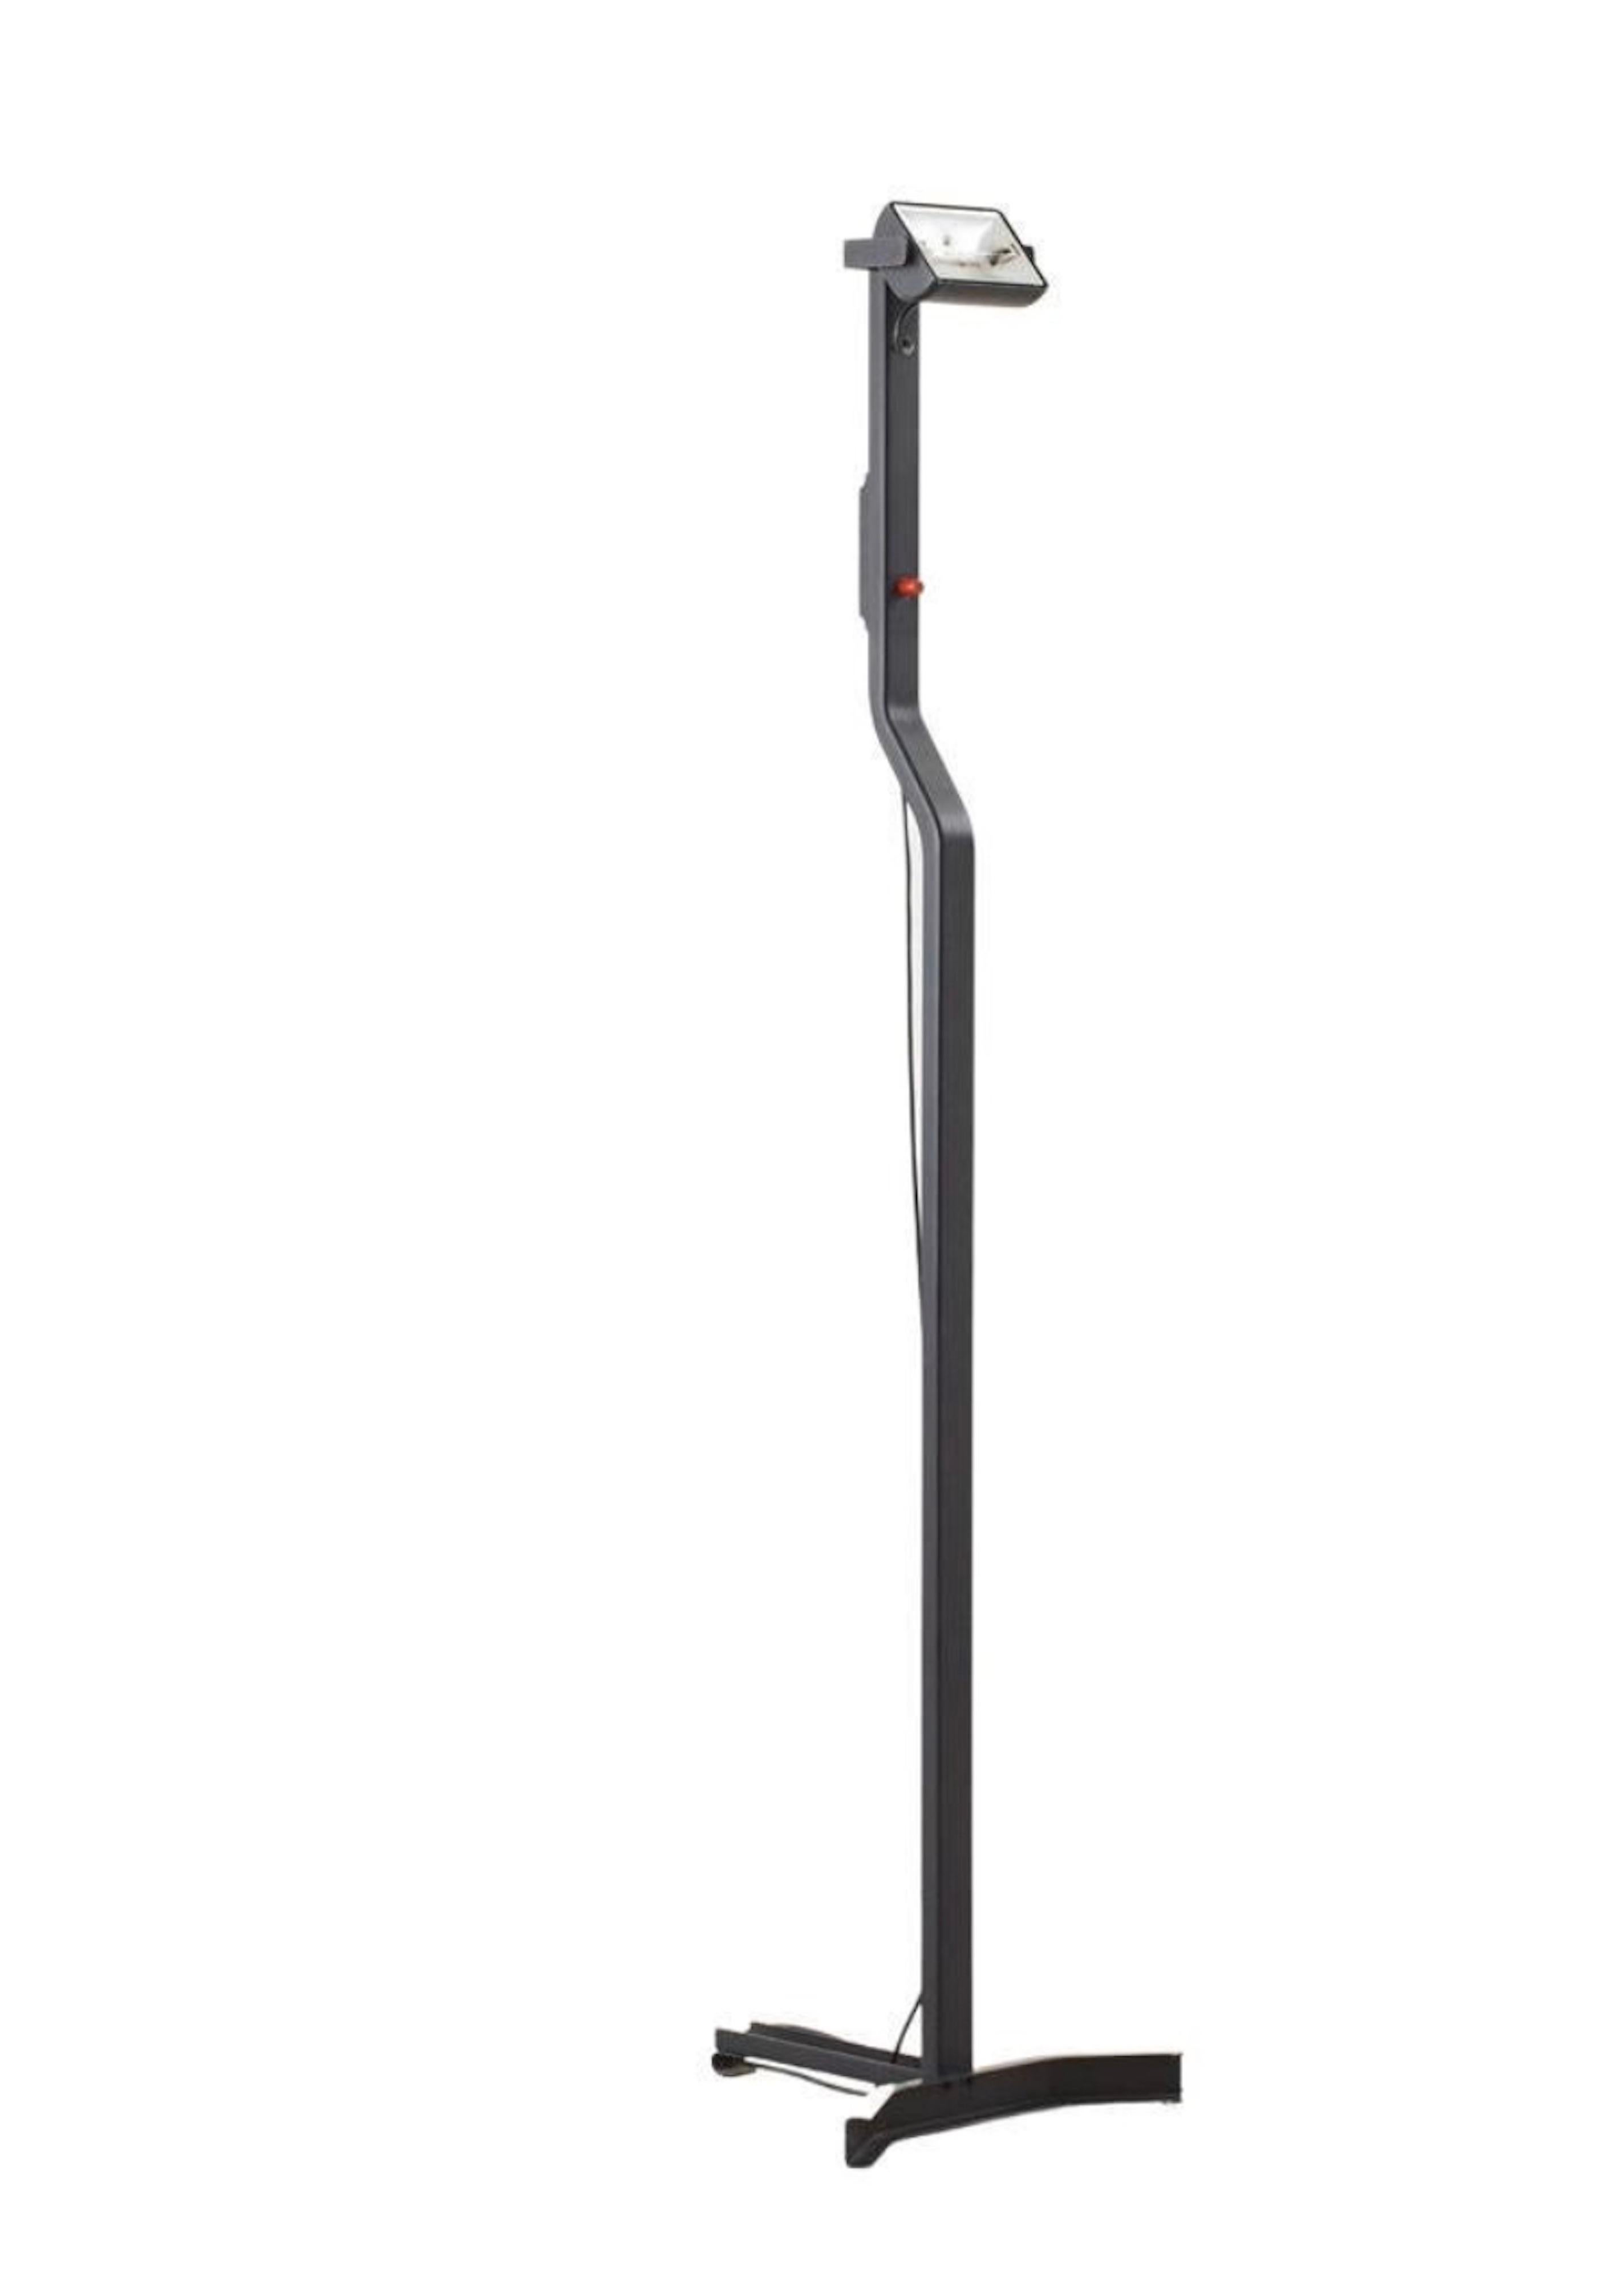 This floor lamp designed for Sirrah is a great example of Takahama's futuristic minimalist aesthetic. 
The Sirio T floor lamp uses a halogen bulb encased in a simple metal cap, adjustable for different moods, with a dimmer switch. This stem also